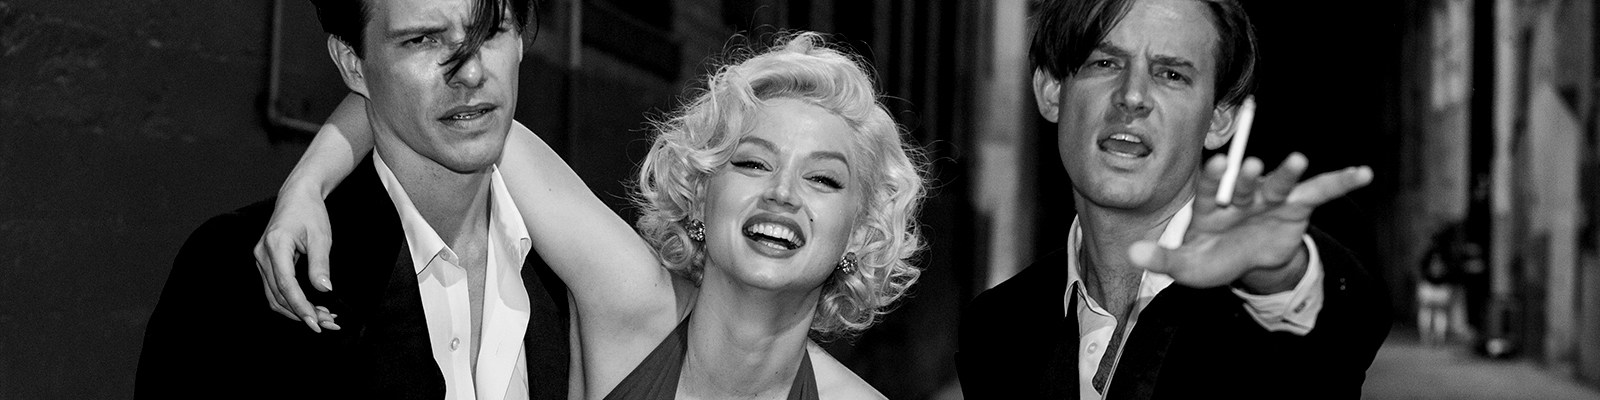 The Operatic Fiction Of ‘Blonde’ Explains Marilyn Monroe Better Than Any Standard Biopic Could